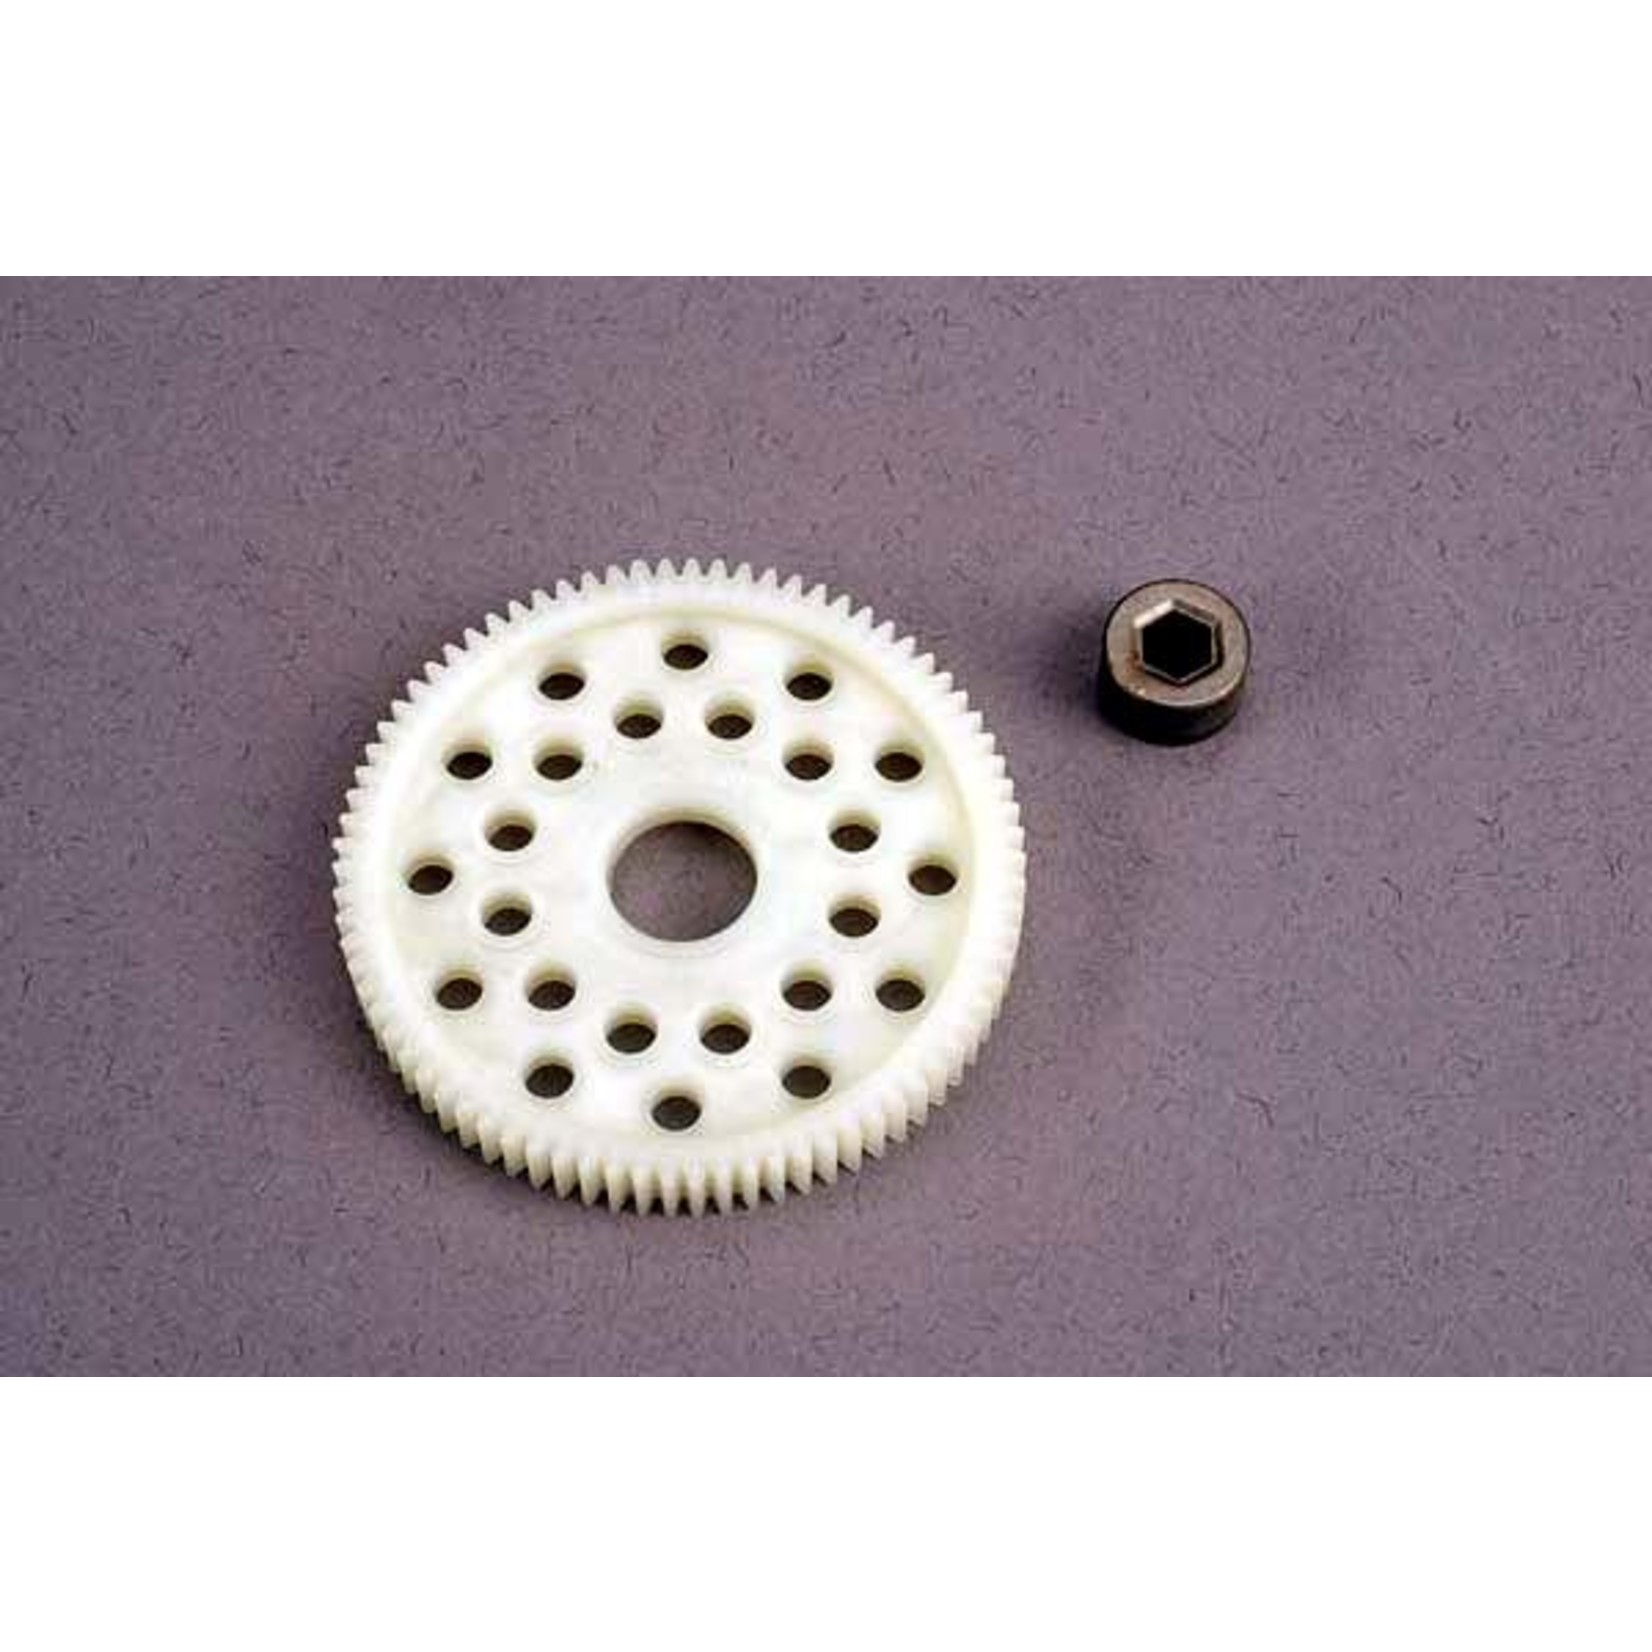 Traxxas 4678 - Spur gear (78-tooth) (48-pitch) w/bushing